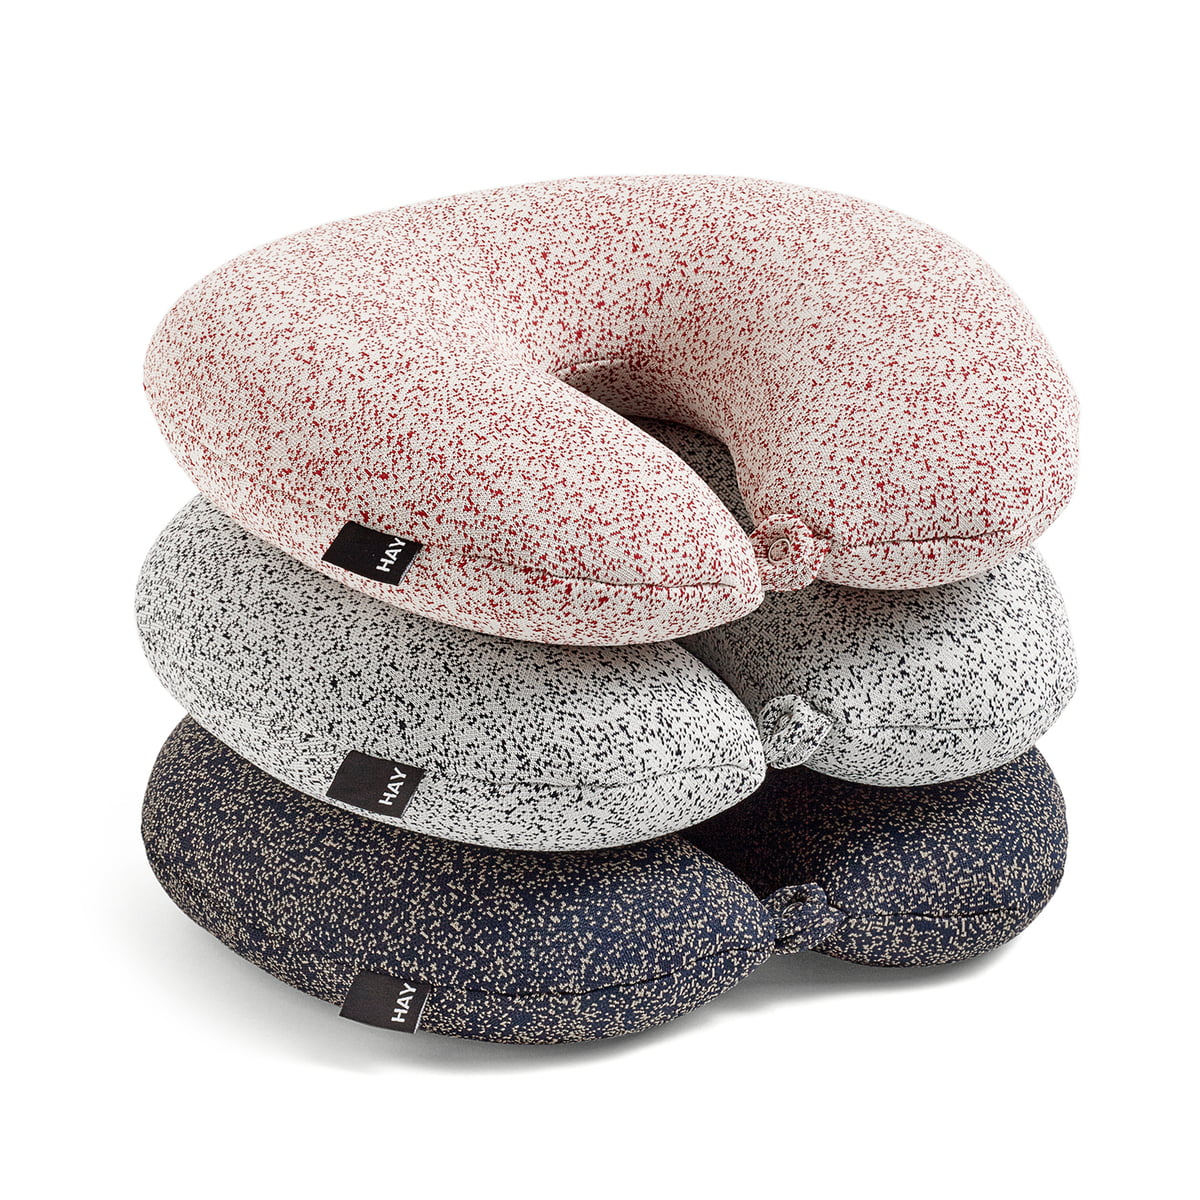 Buy the sleep well travel pillow by Hay 